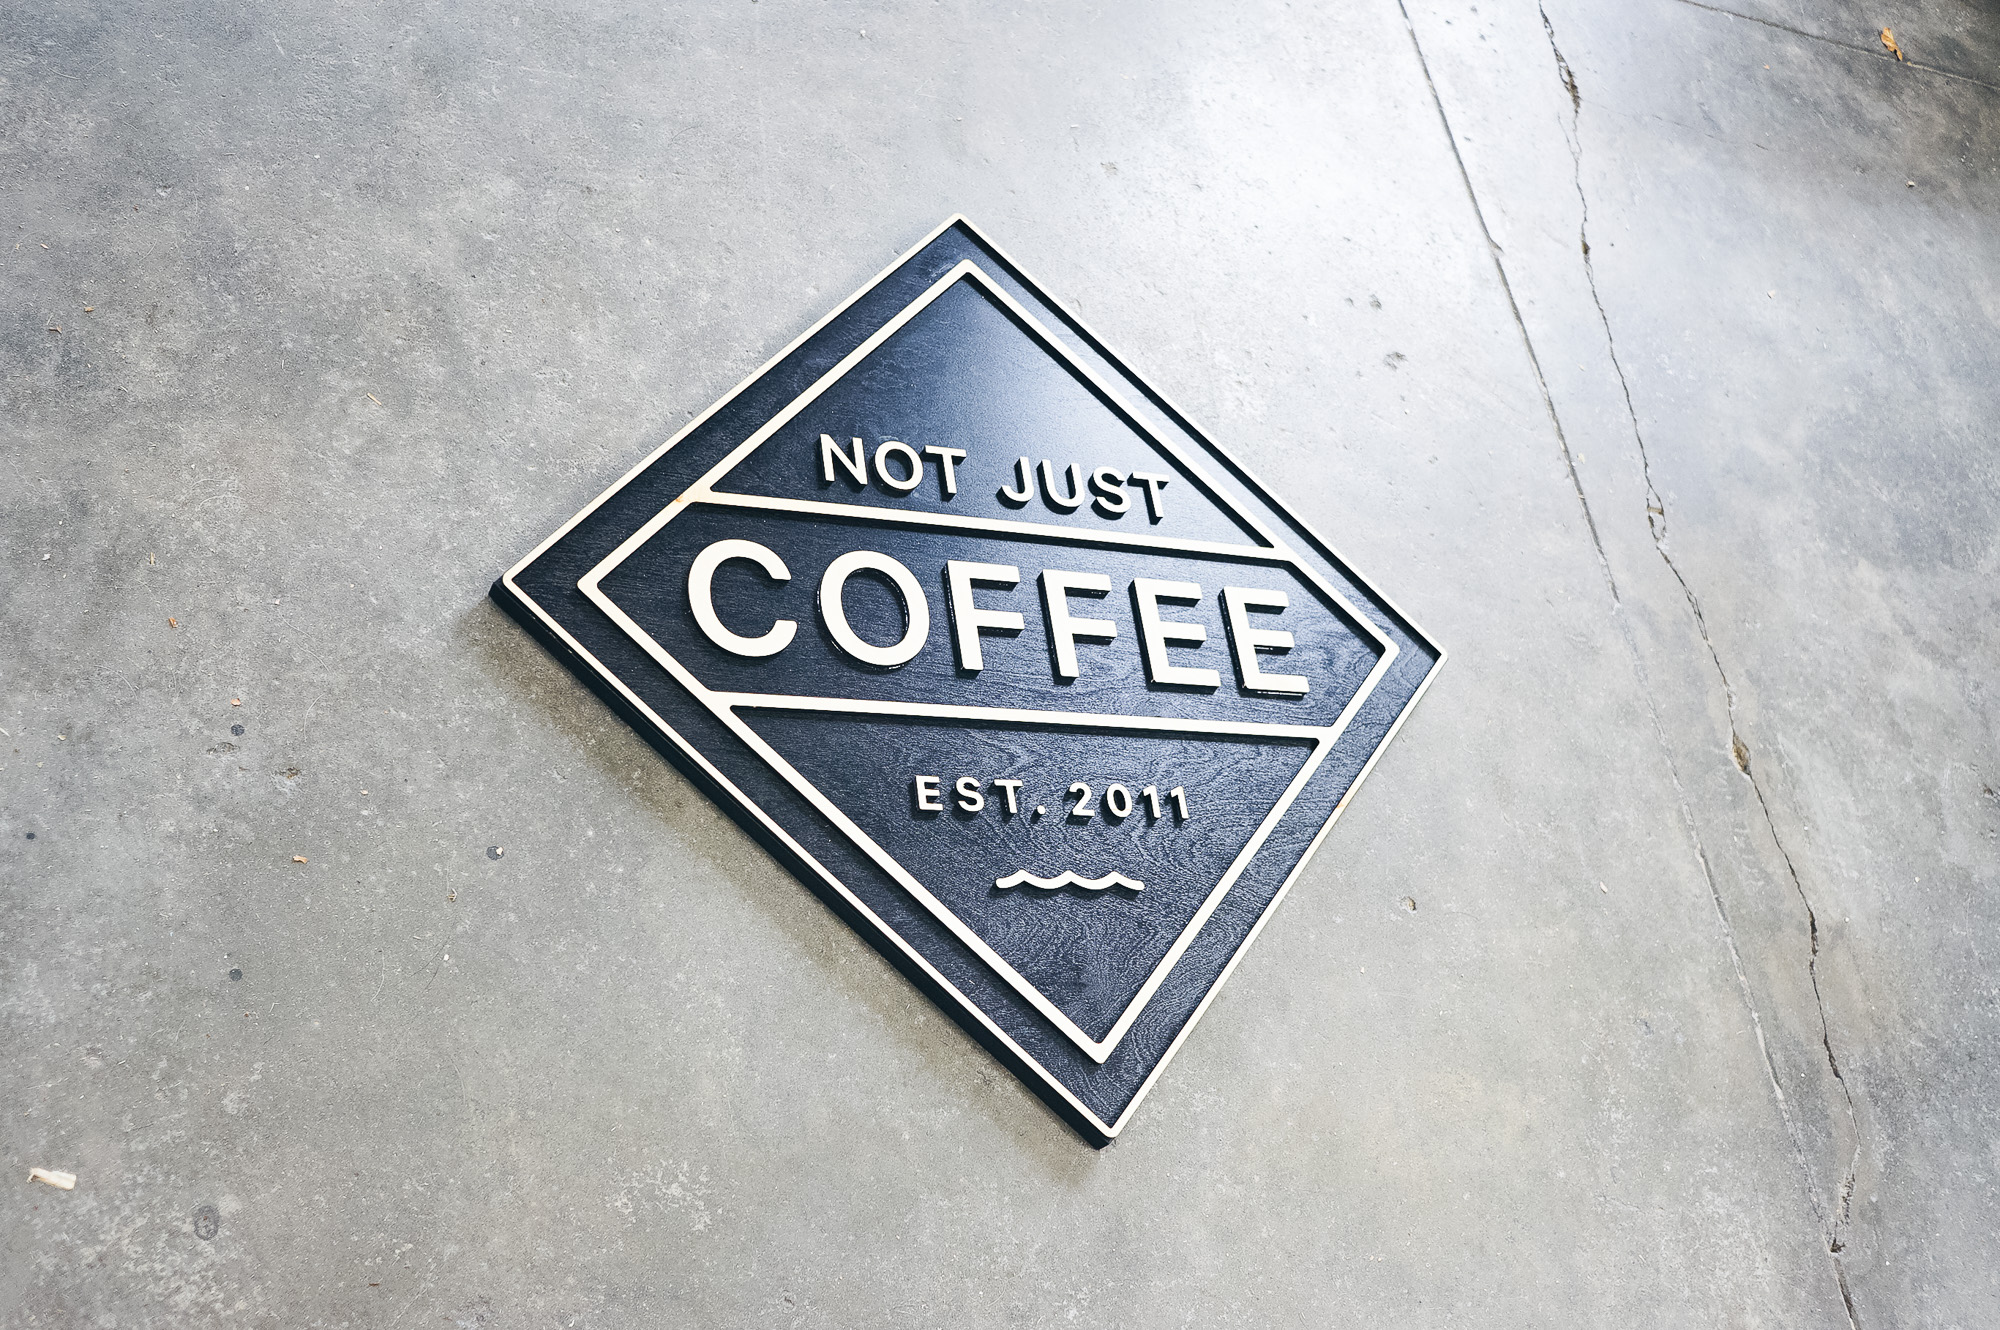 Black and light wood sign for Not Just Coffee